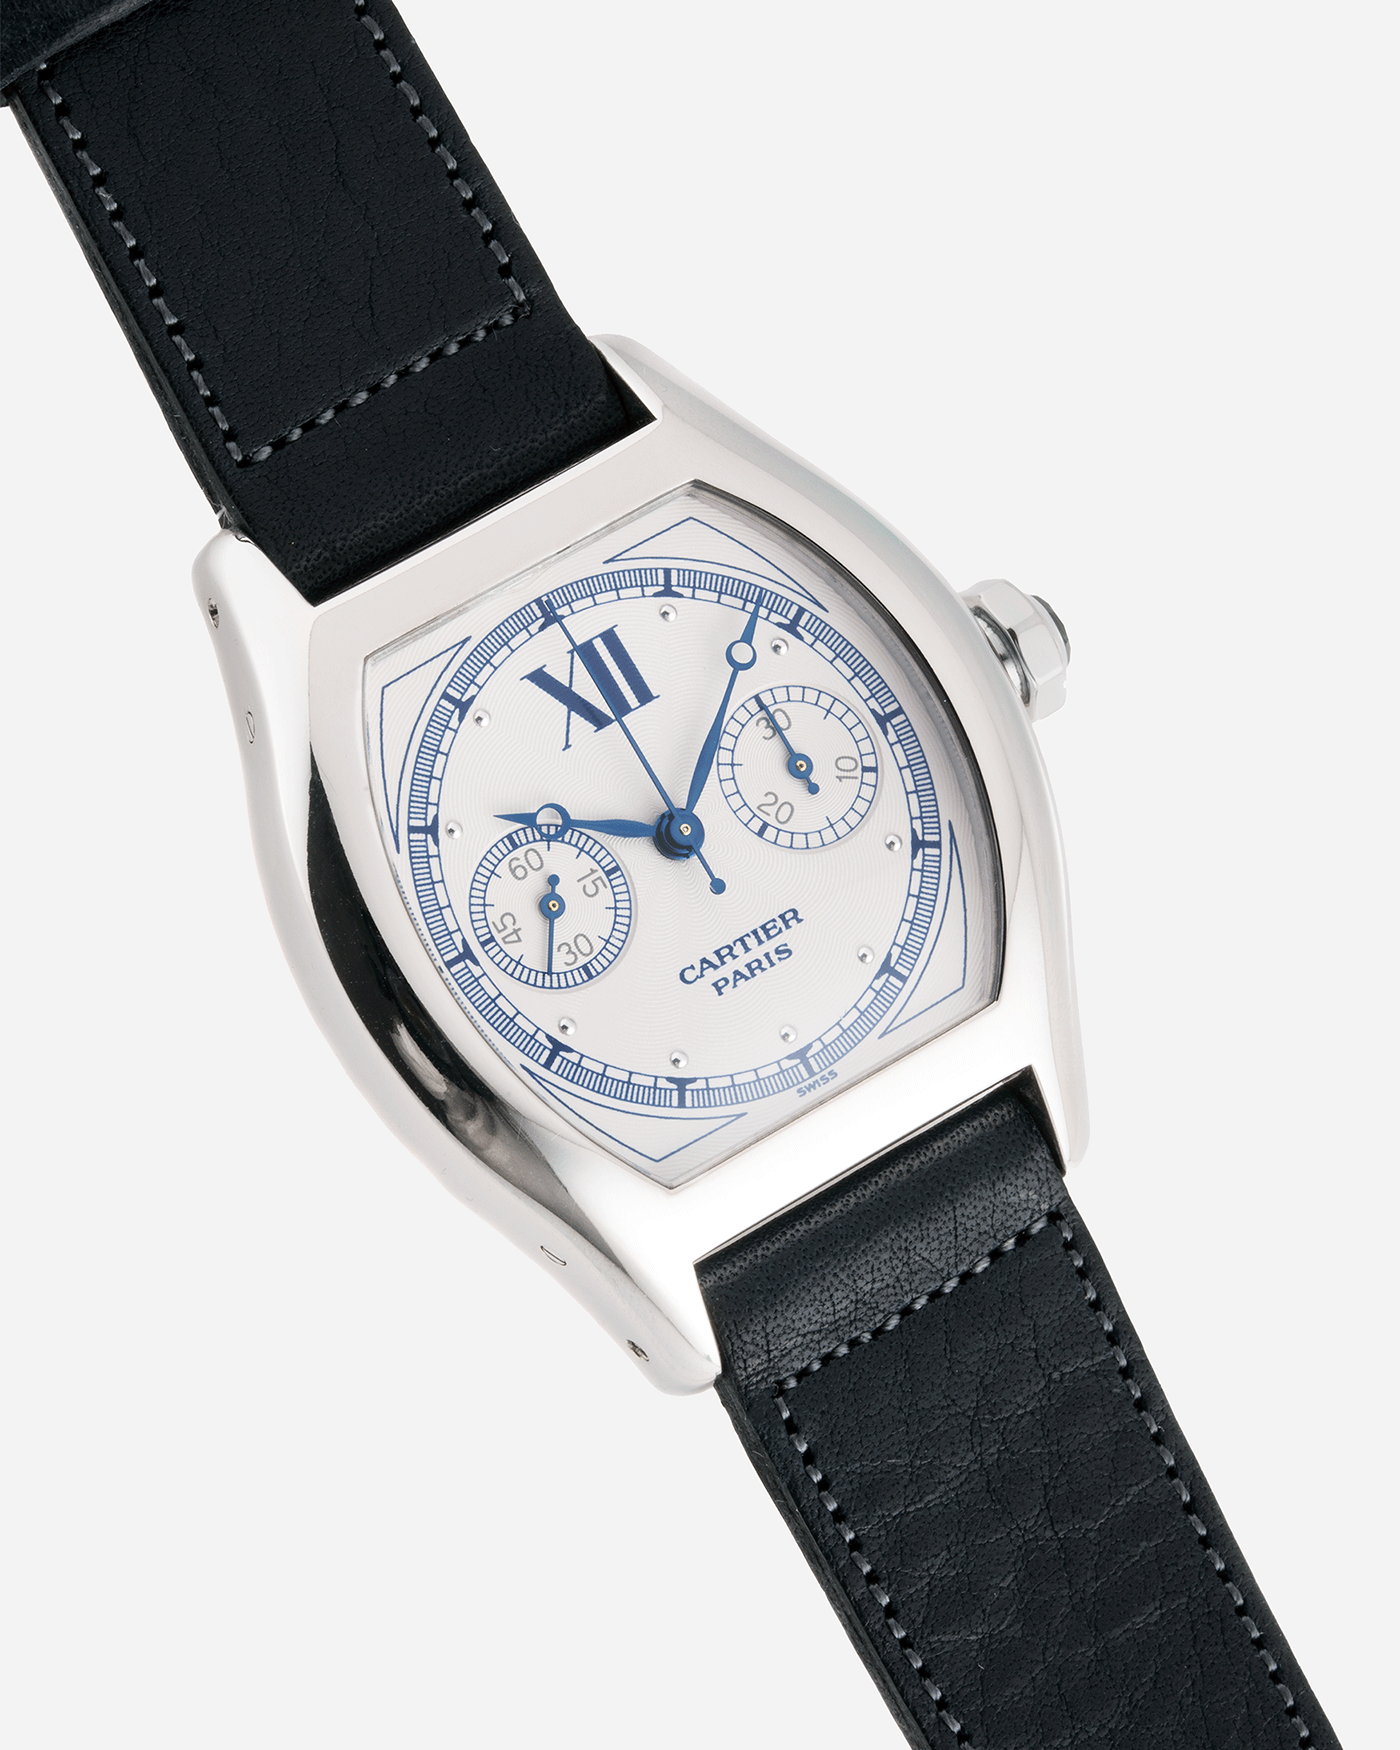 Brand: Cartier Year: 2000’s Model: CPCP Collection Prive Tortue Monopoussoir Reference: 2356 Material: 18k White Gold Movement: THA Cal. 045MC Case Diameter: 43 x 35 mm Strap: Navy Blue Accurate Form Japanese Calf Strap with separate 18k Cartier White Gold Deployant